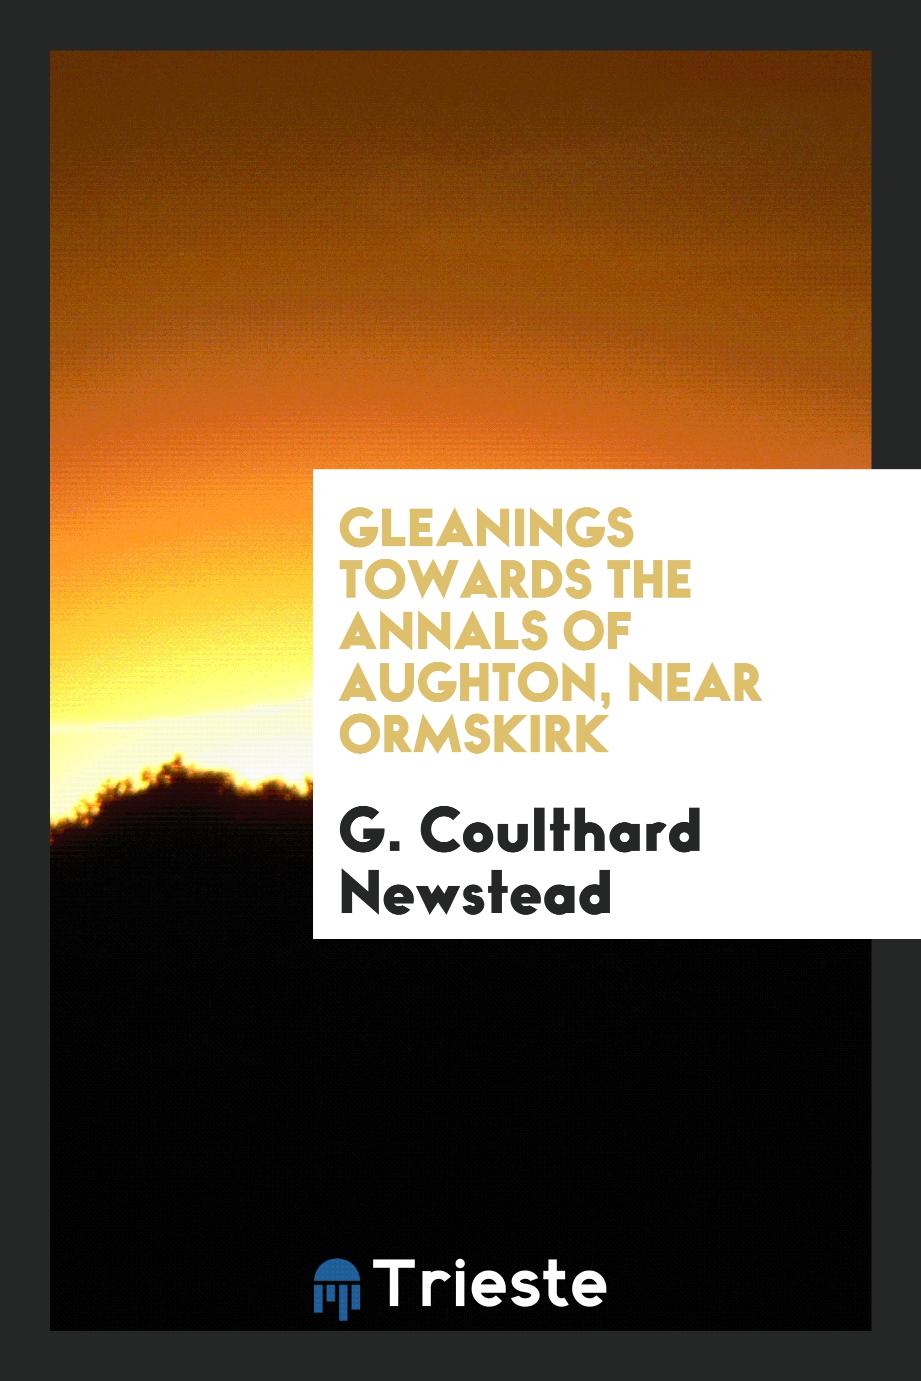 Gleanings Towards the Annals of Aughton, Near Ormskirk